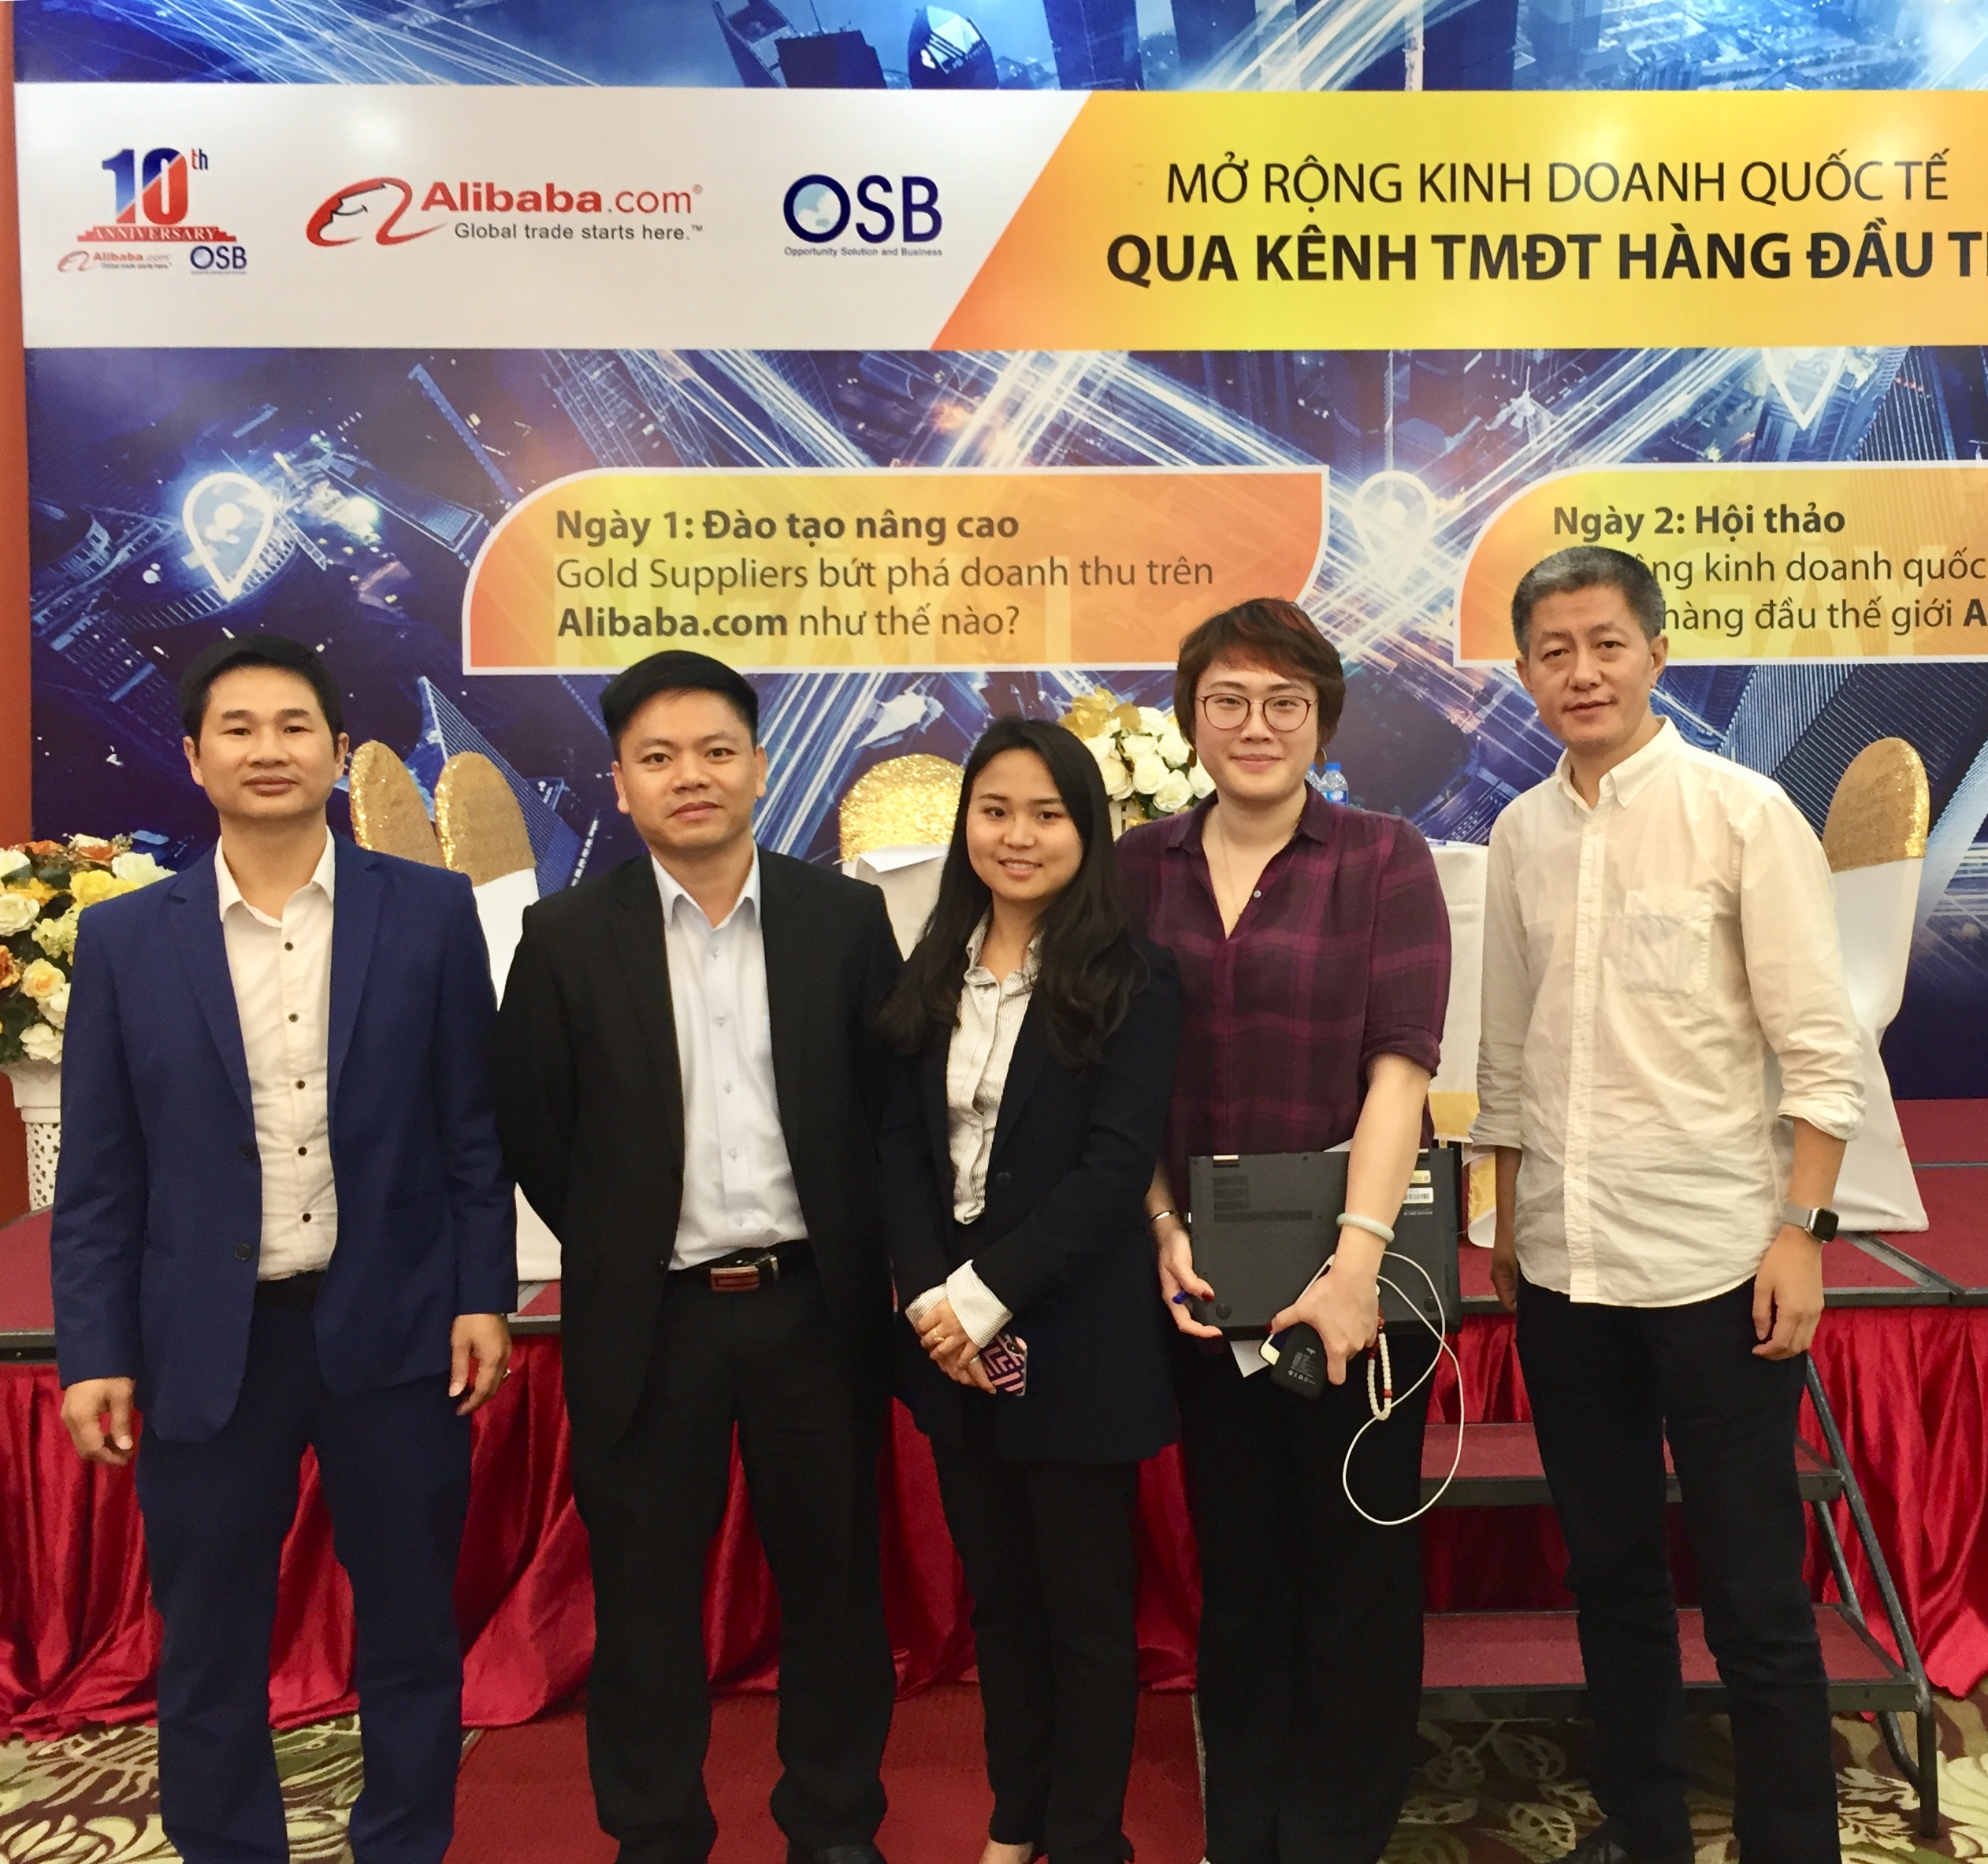 Alibaba and OSB successfully organized series of events in Hanoi